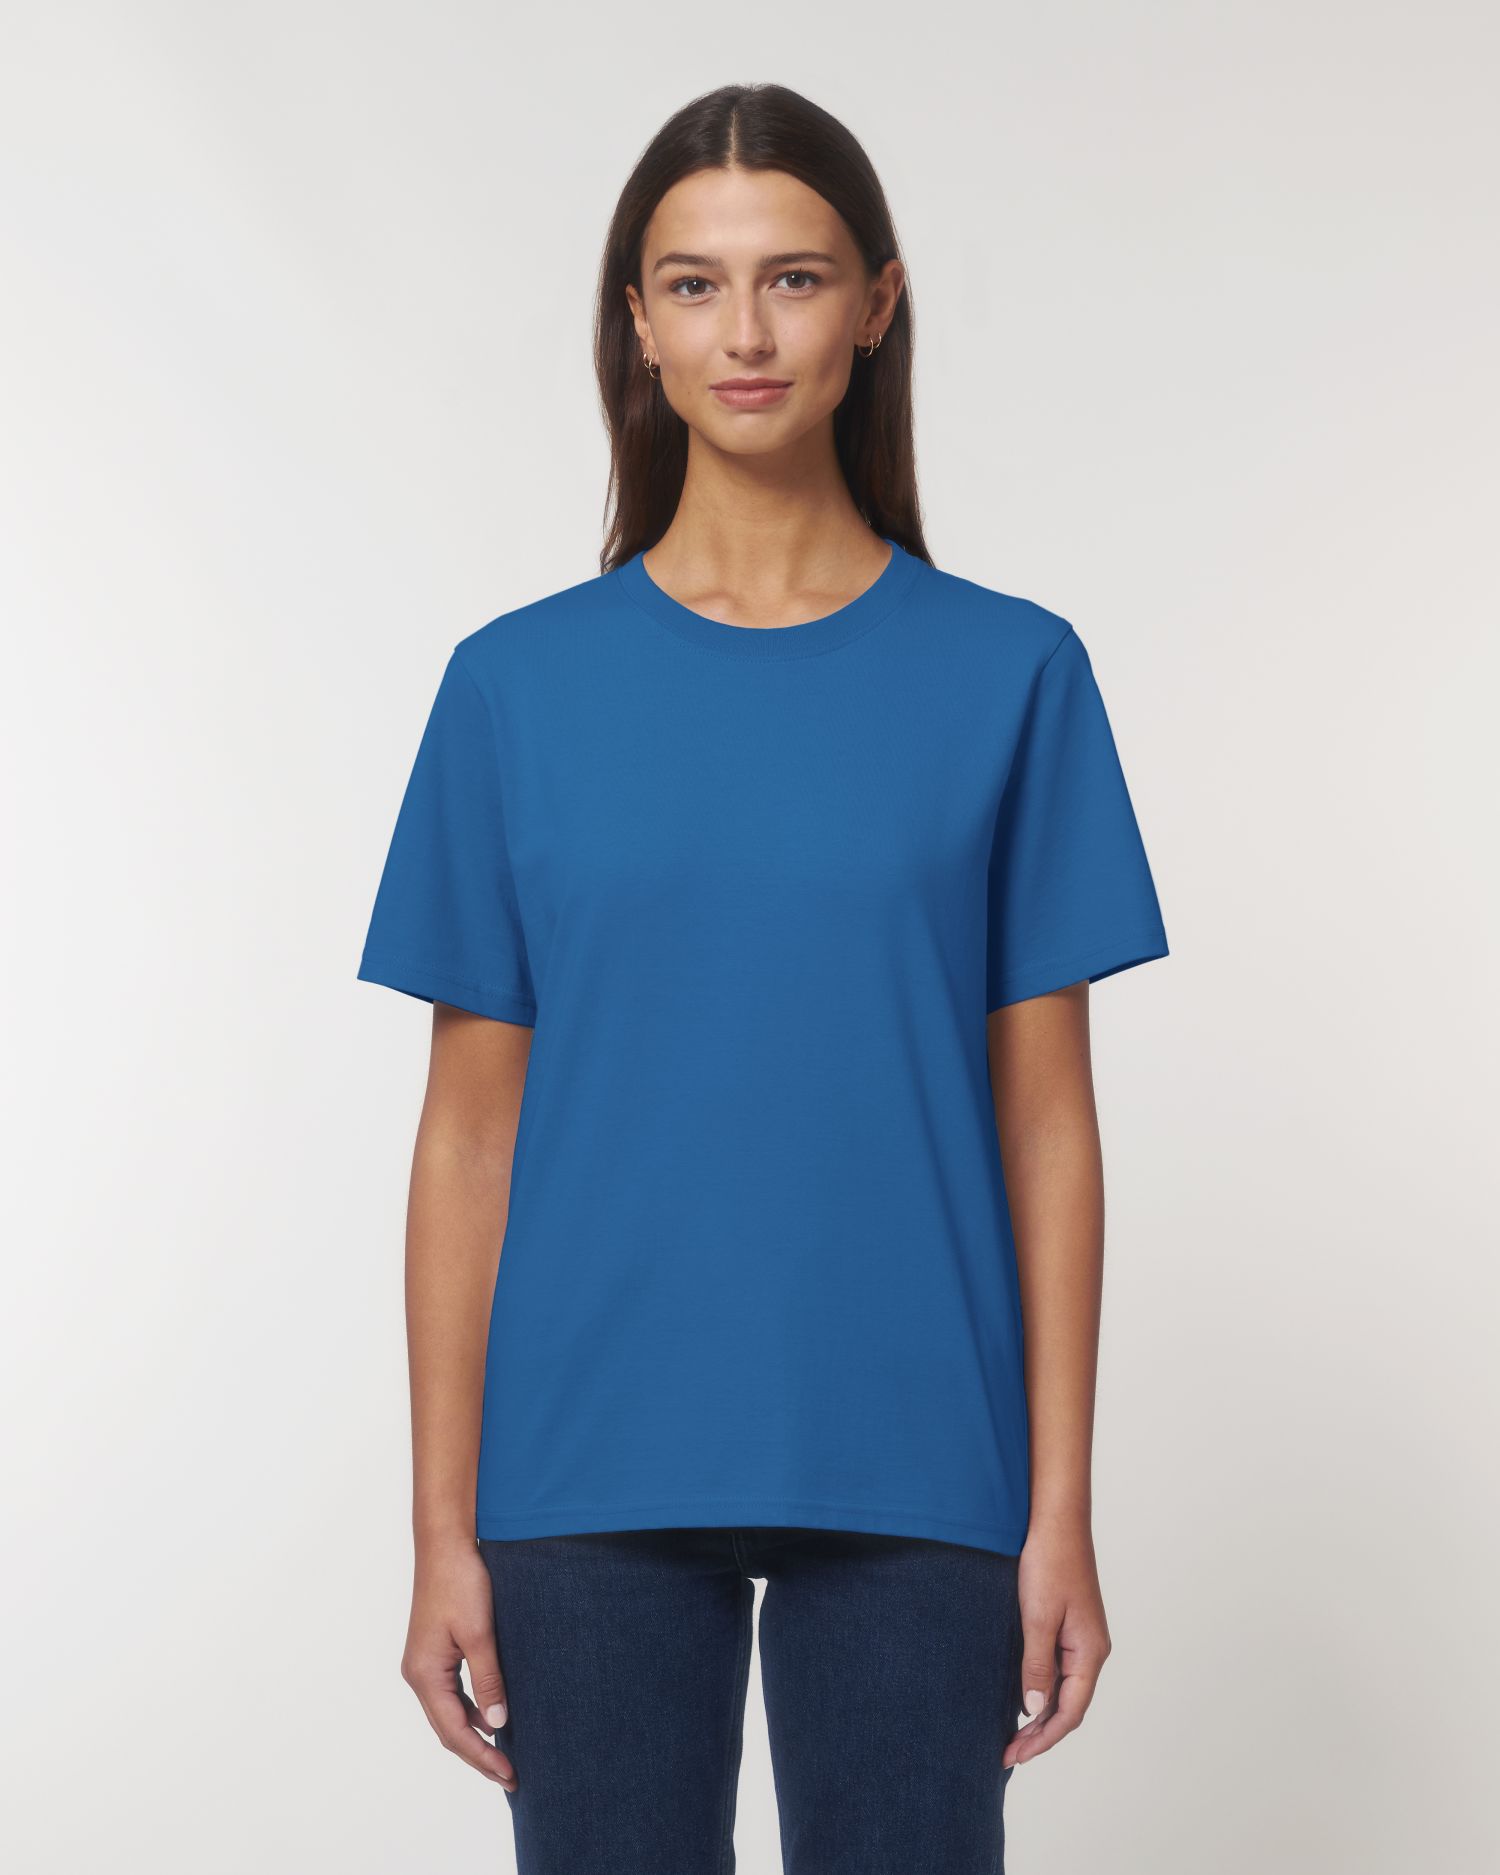 T-Shirt Stanley Sparker in Farbe Royal Blue